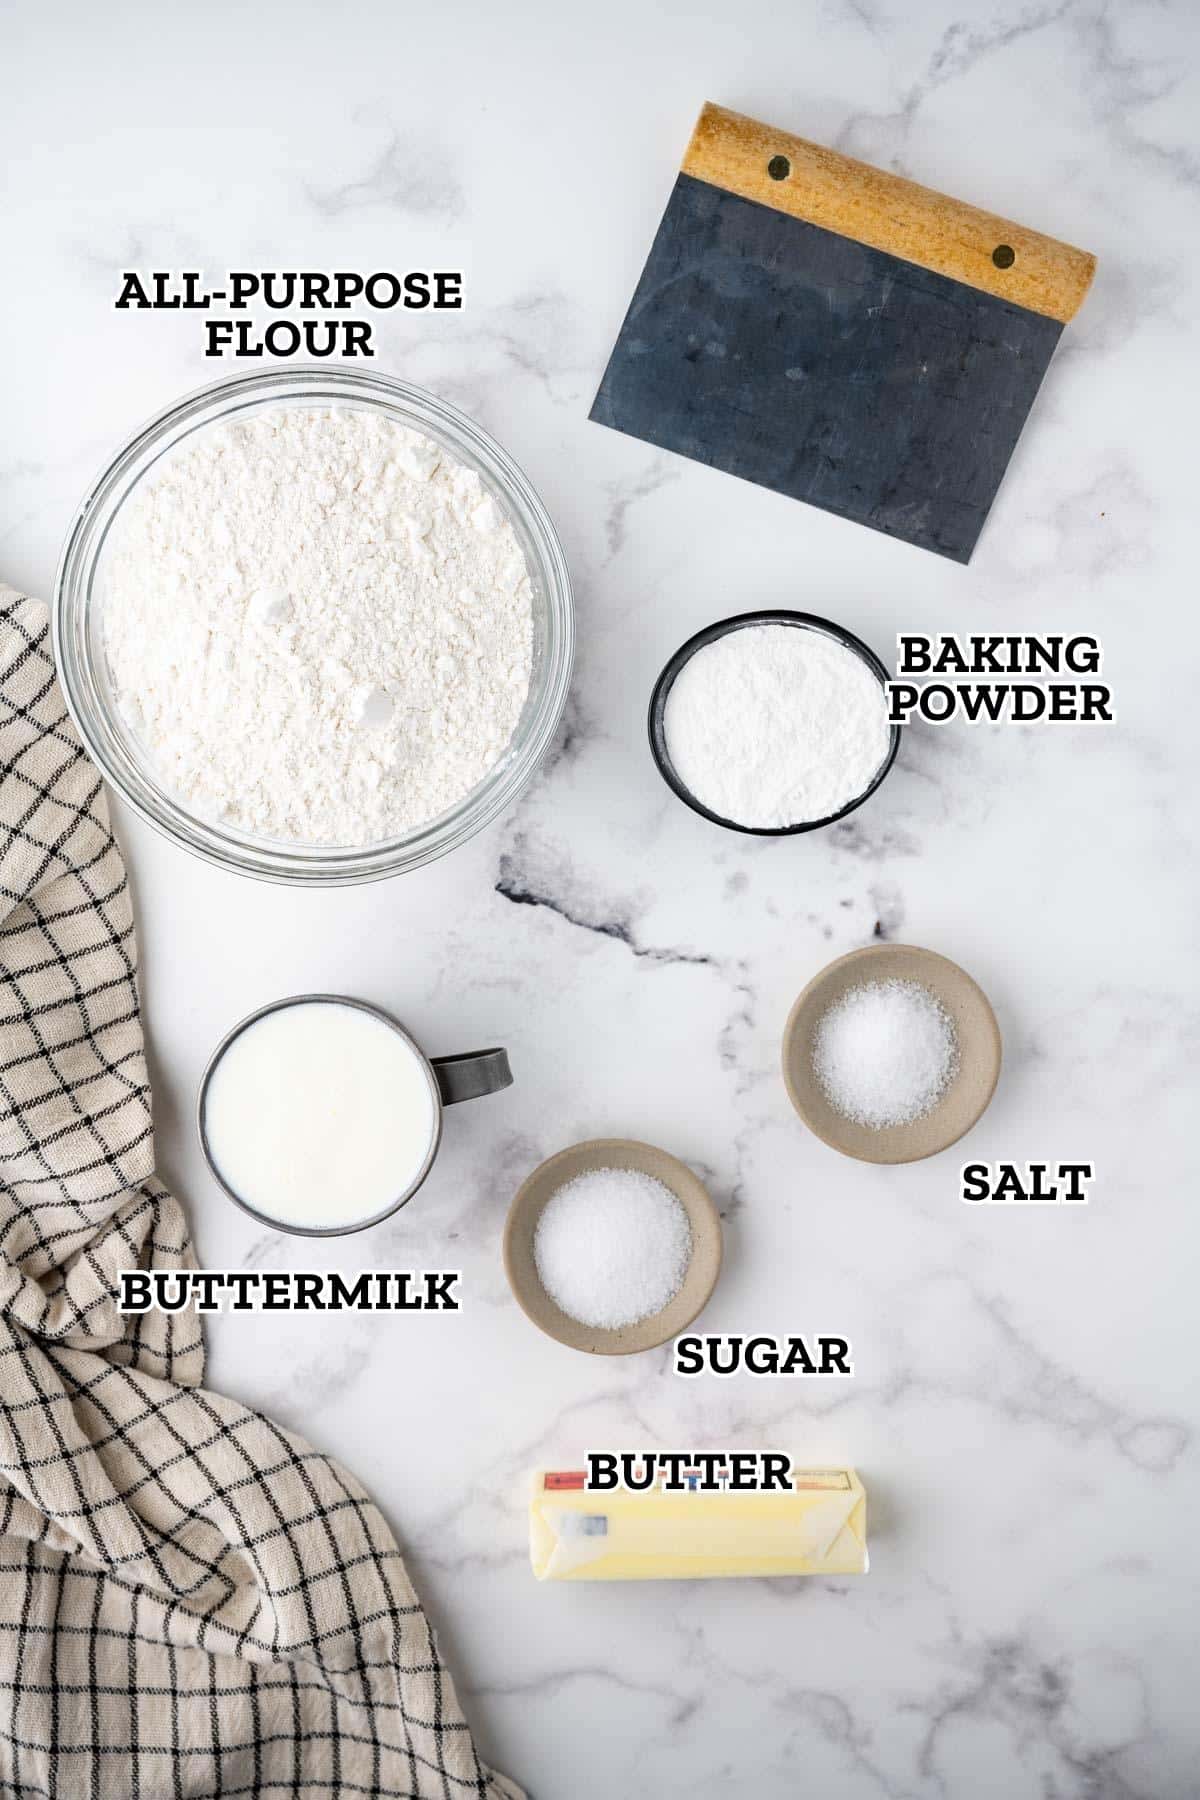 A labeled image of ingredients needed for butter swim biscuits.